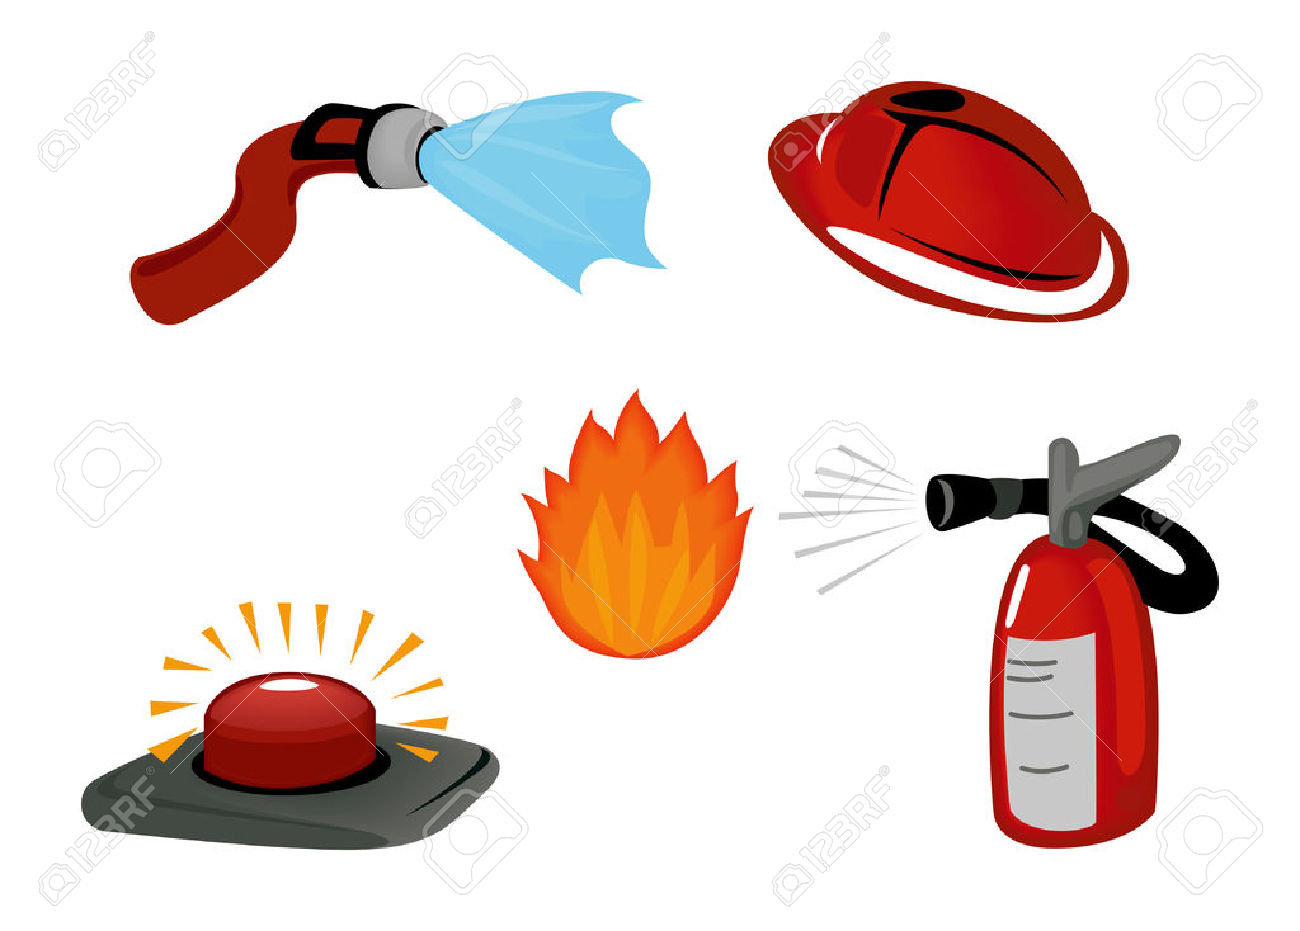 Fire free download best. Firefighter clipart hose clipart